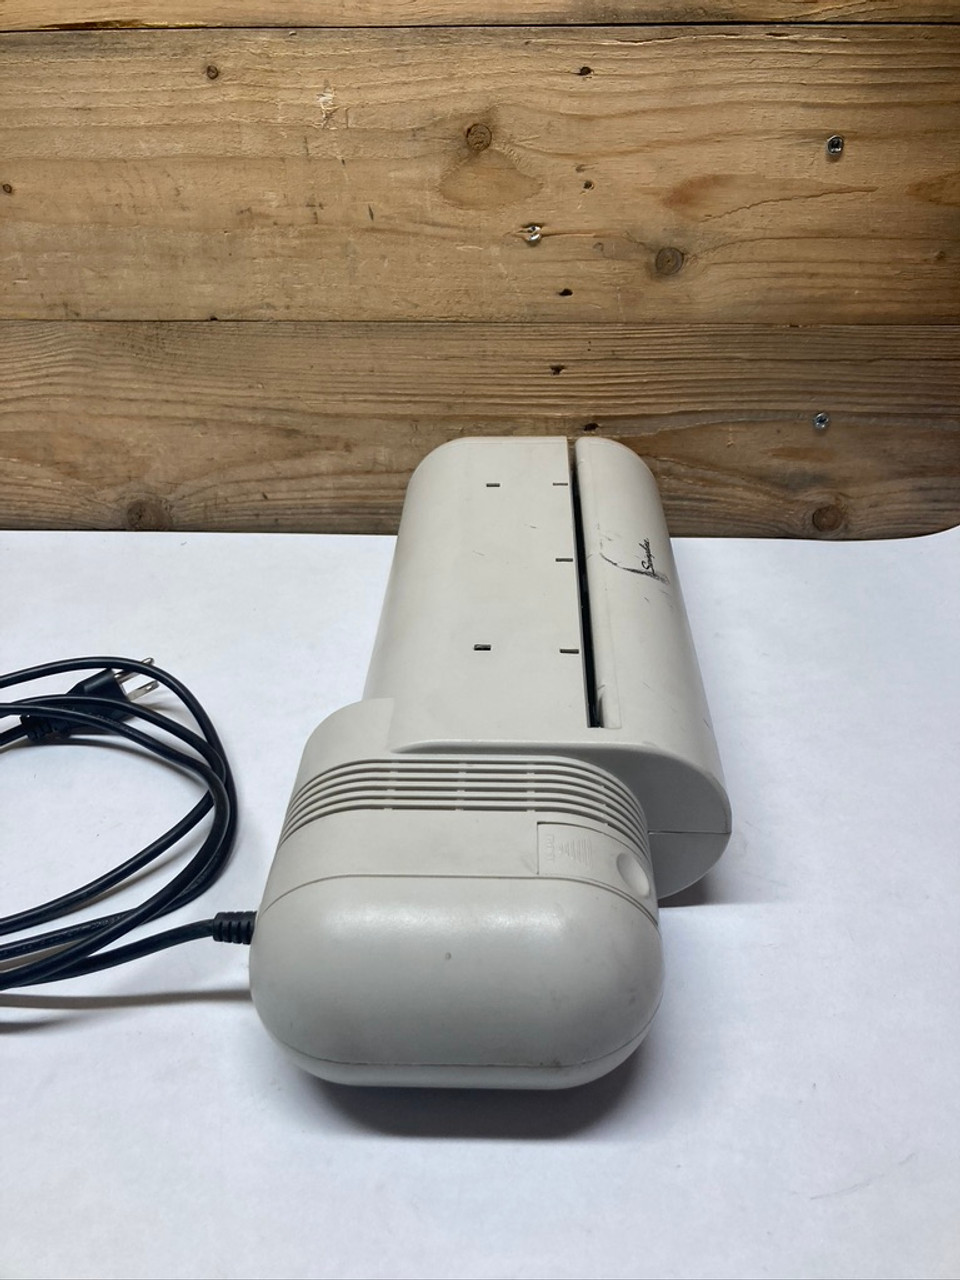 28-Sheet Commercial Electric 3-Hole Punch Model 535 Swingline For Sale